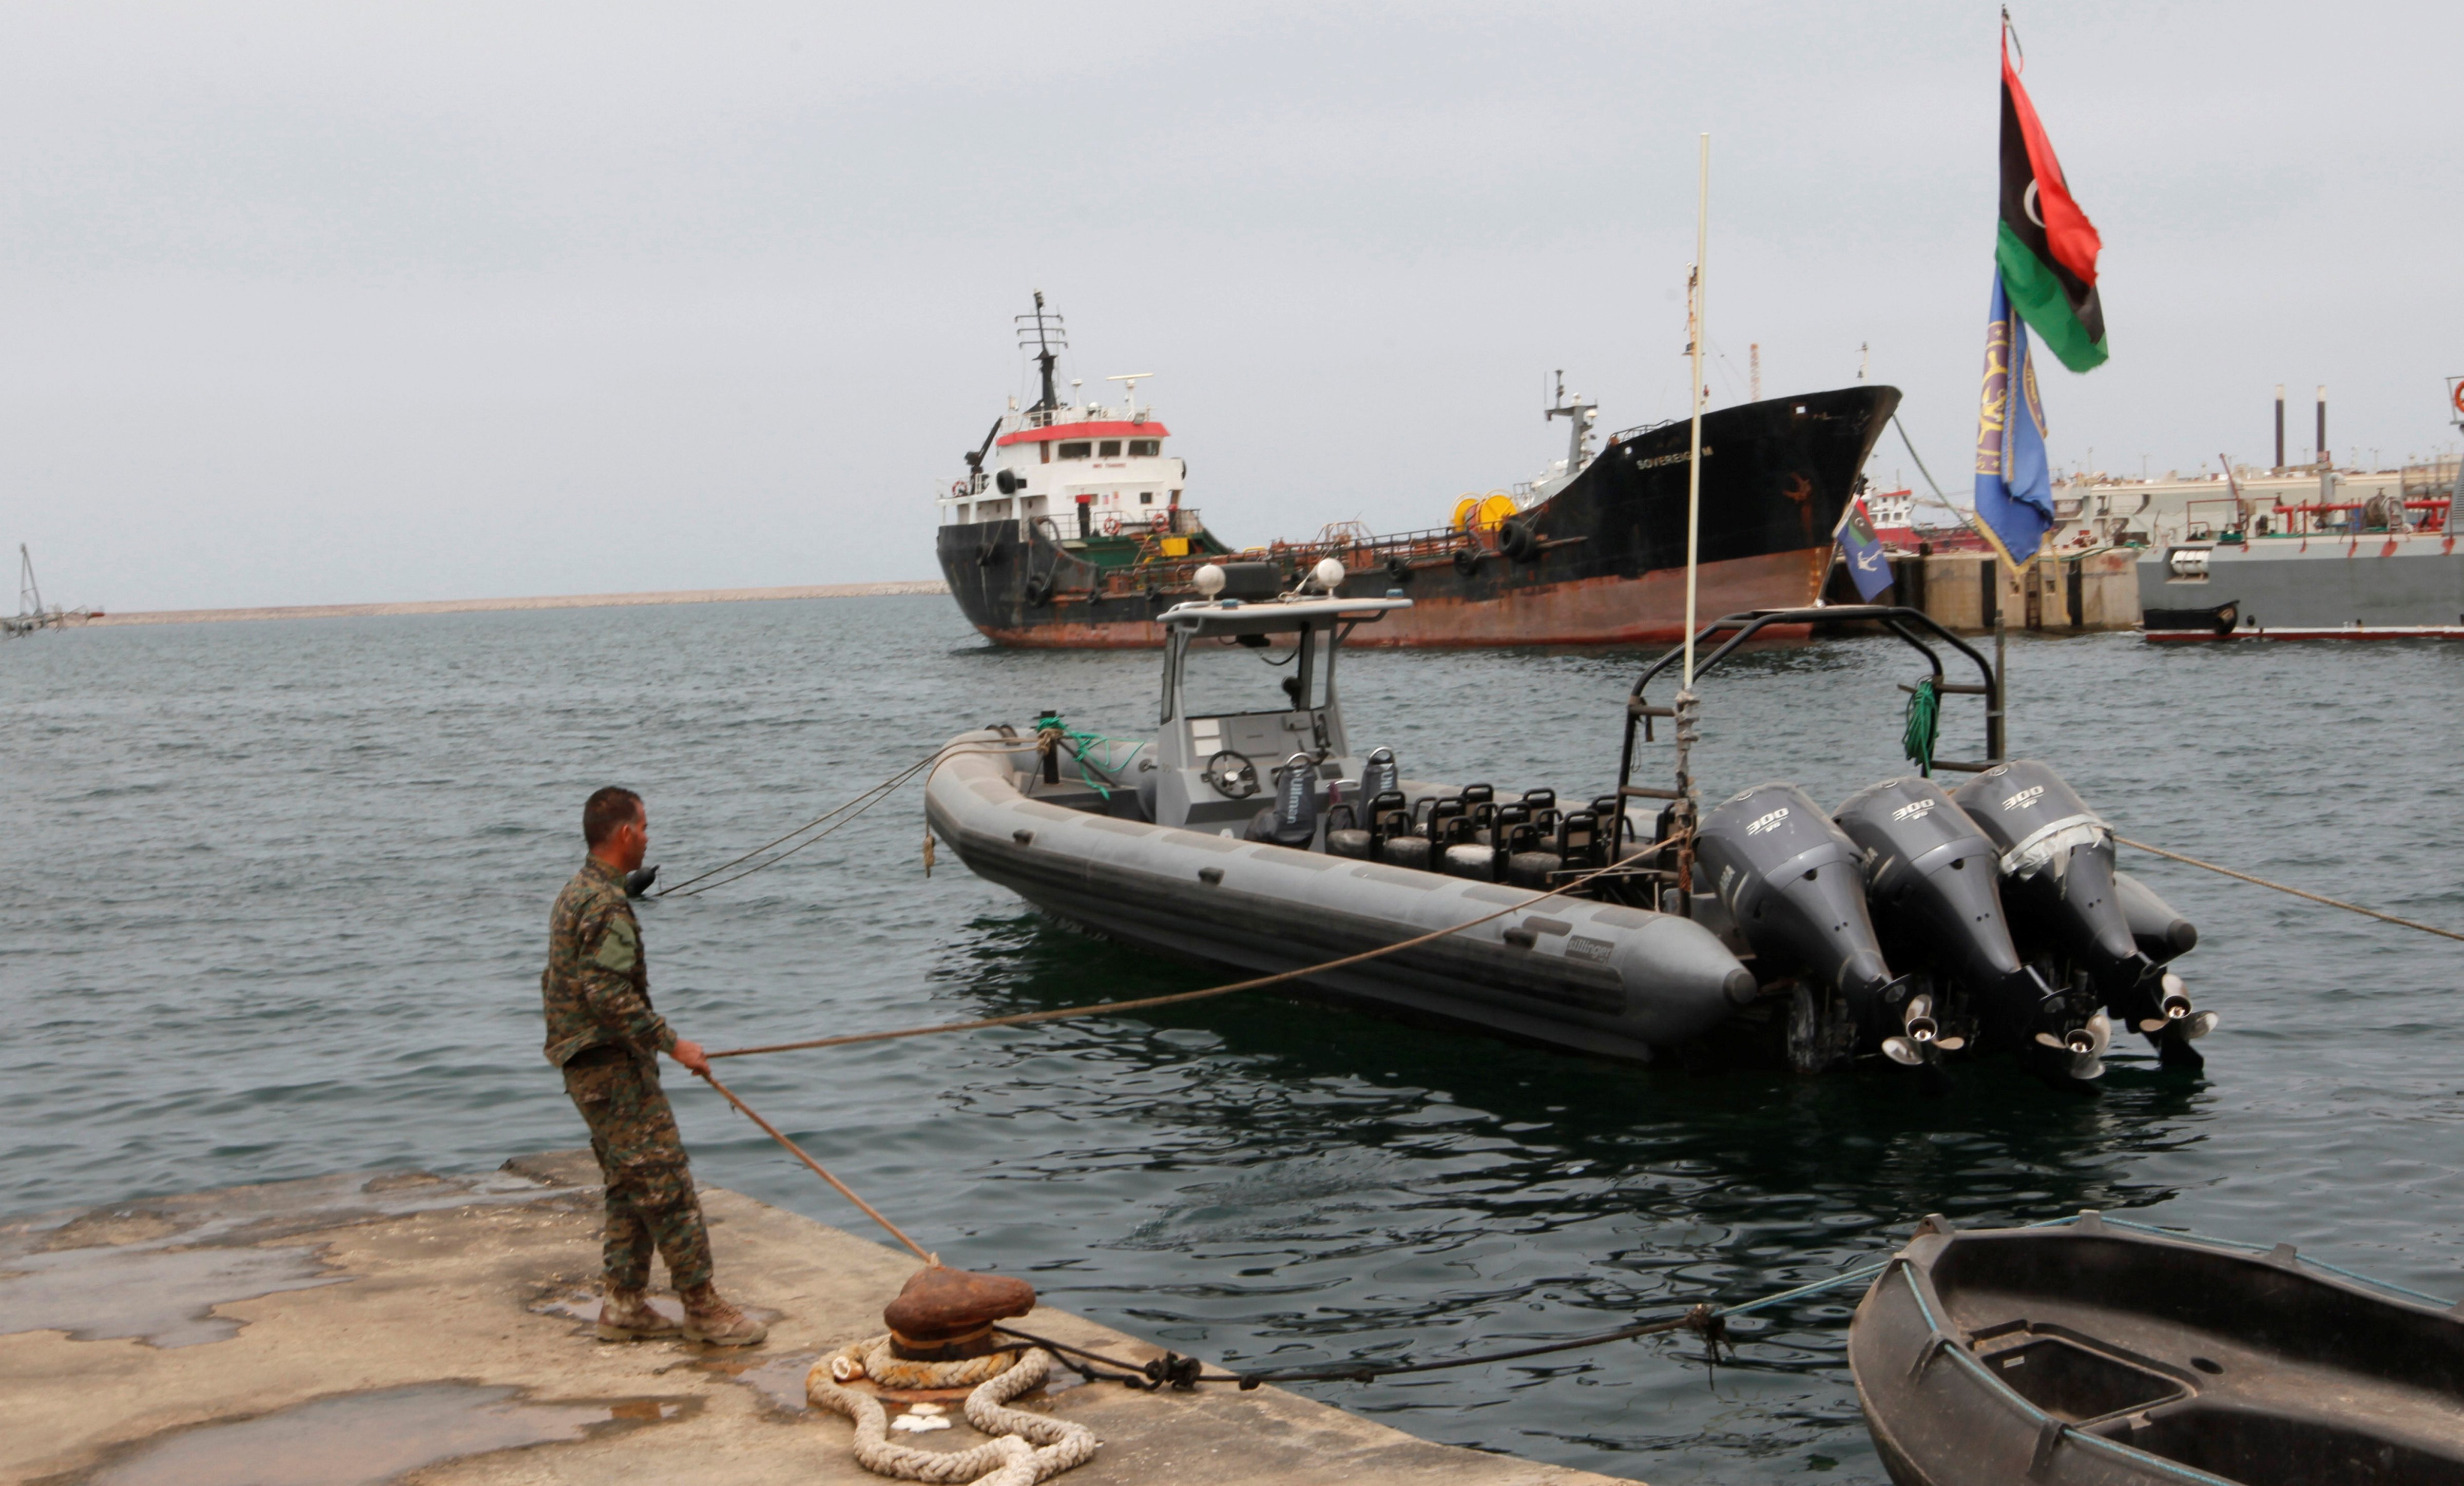 A member of the Libyan coast guard conducts a daily routine check on one of the patrol boats in Tripoli